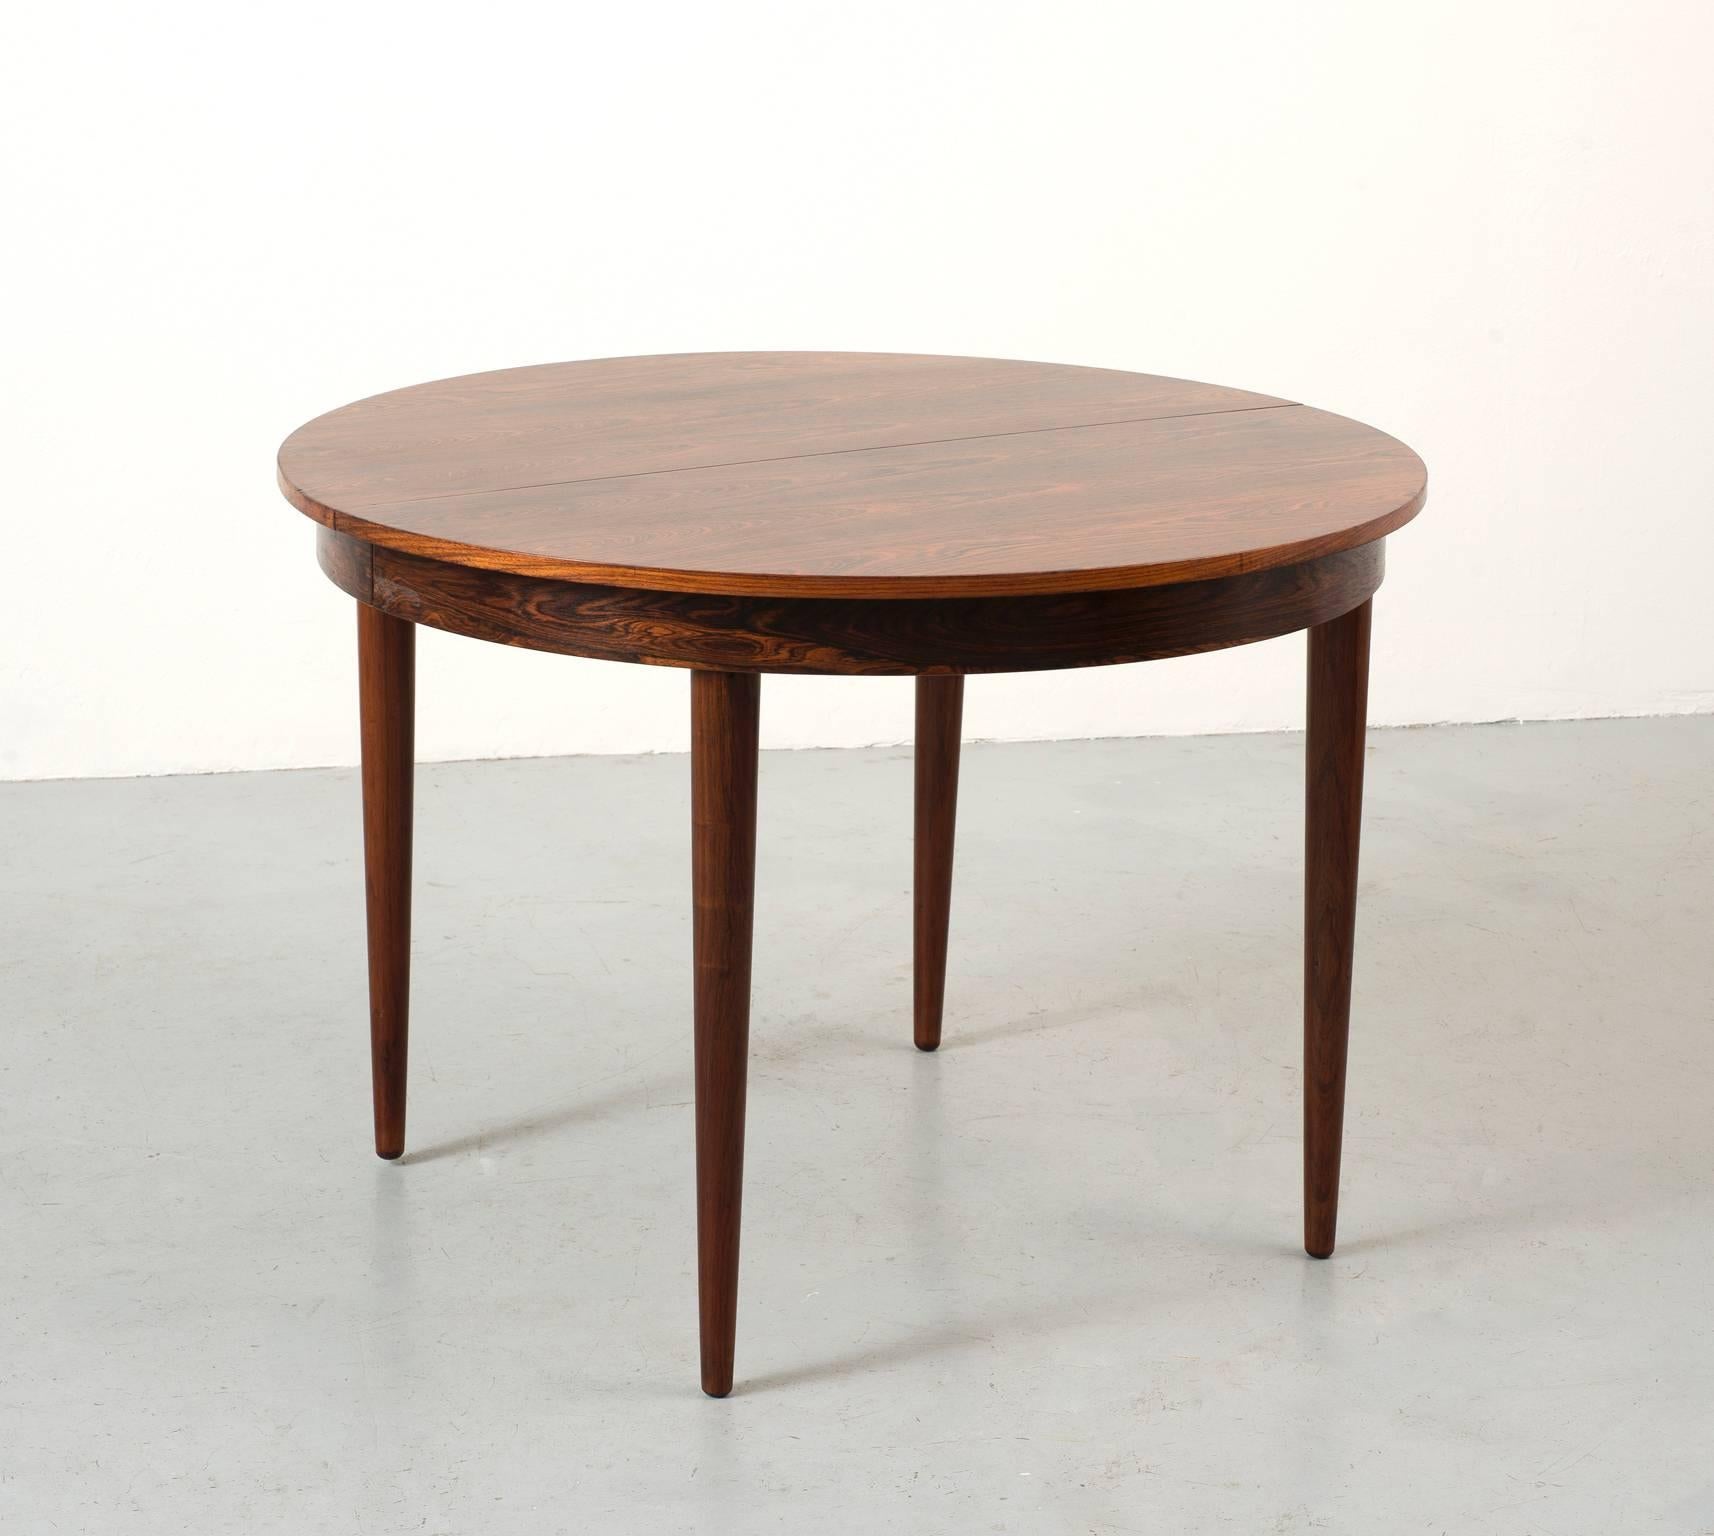 An elegant dining table by Hans Olsen in book matched rosewood for Frem Rojle, circa 1962. Extension leaf 19.75 inches in width.